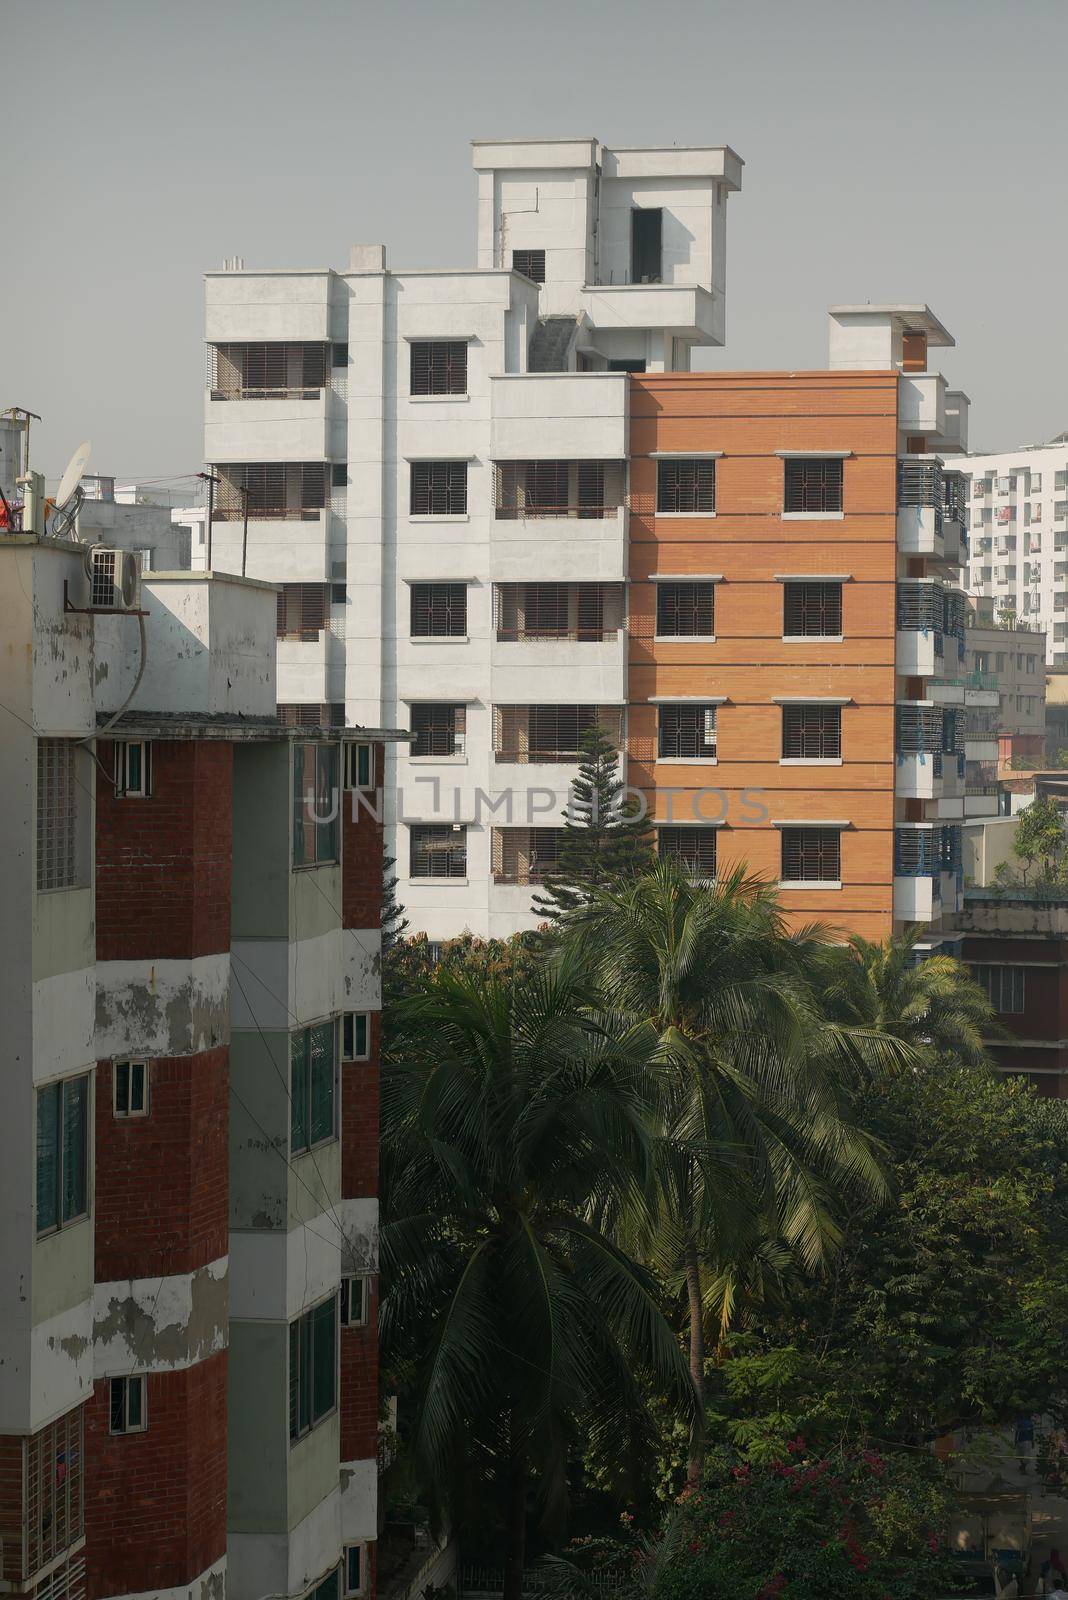 residential buildings in dhaka in bangladesh by towfiq007